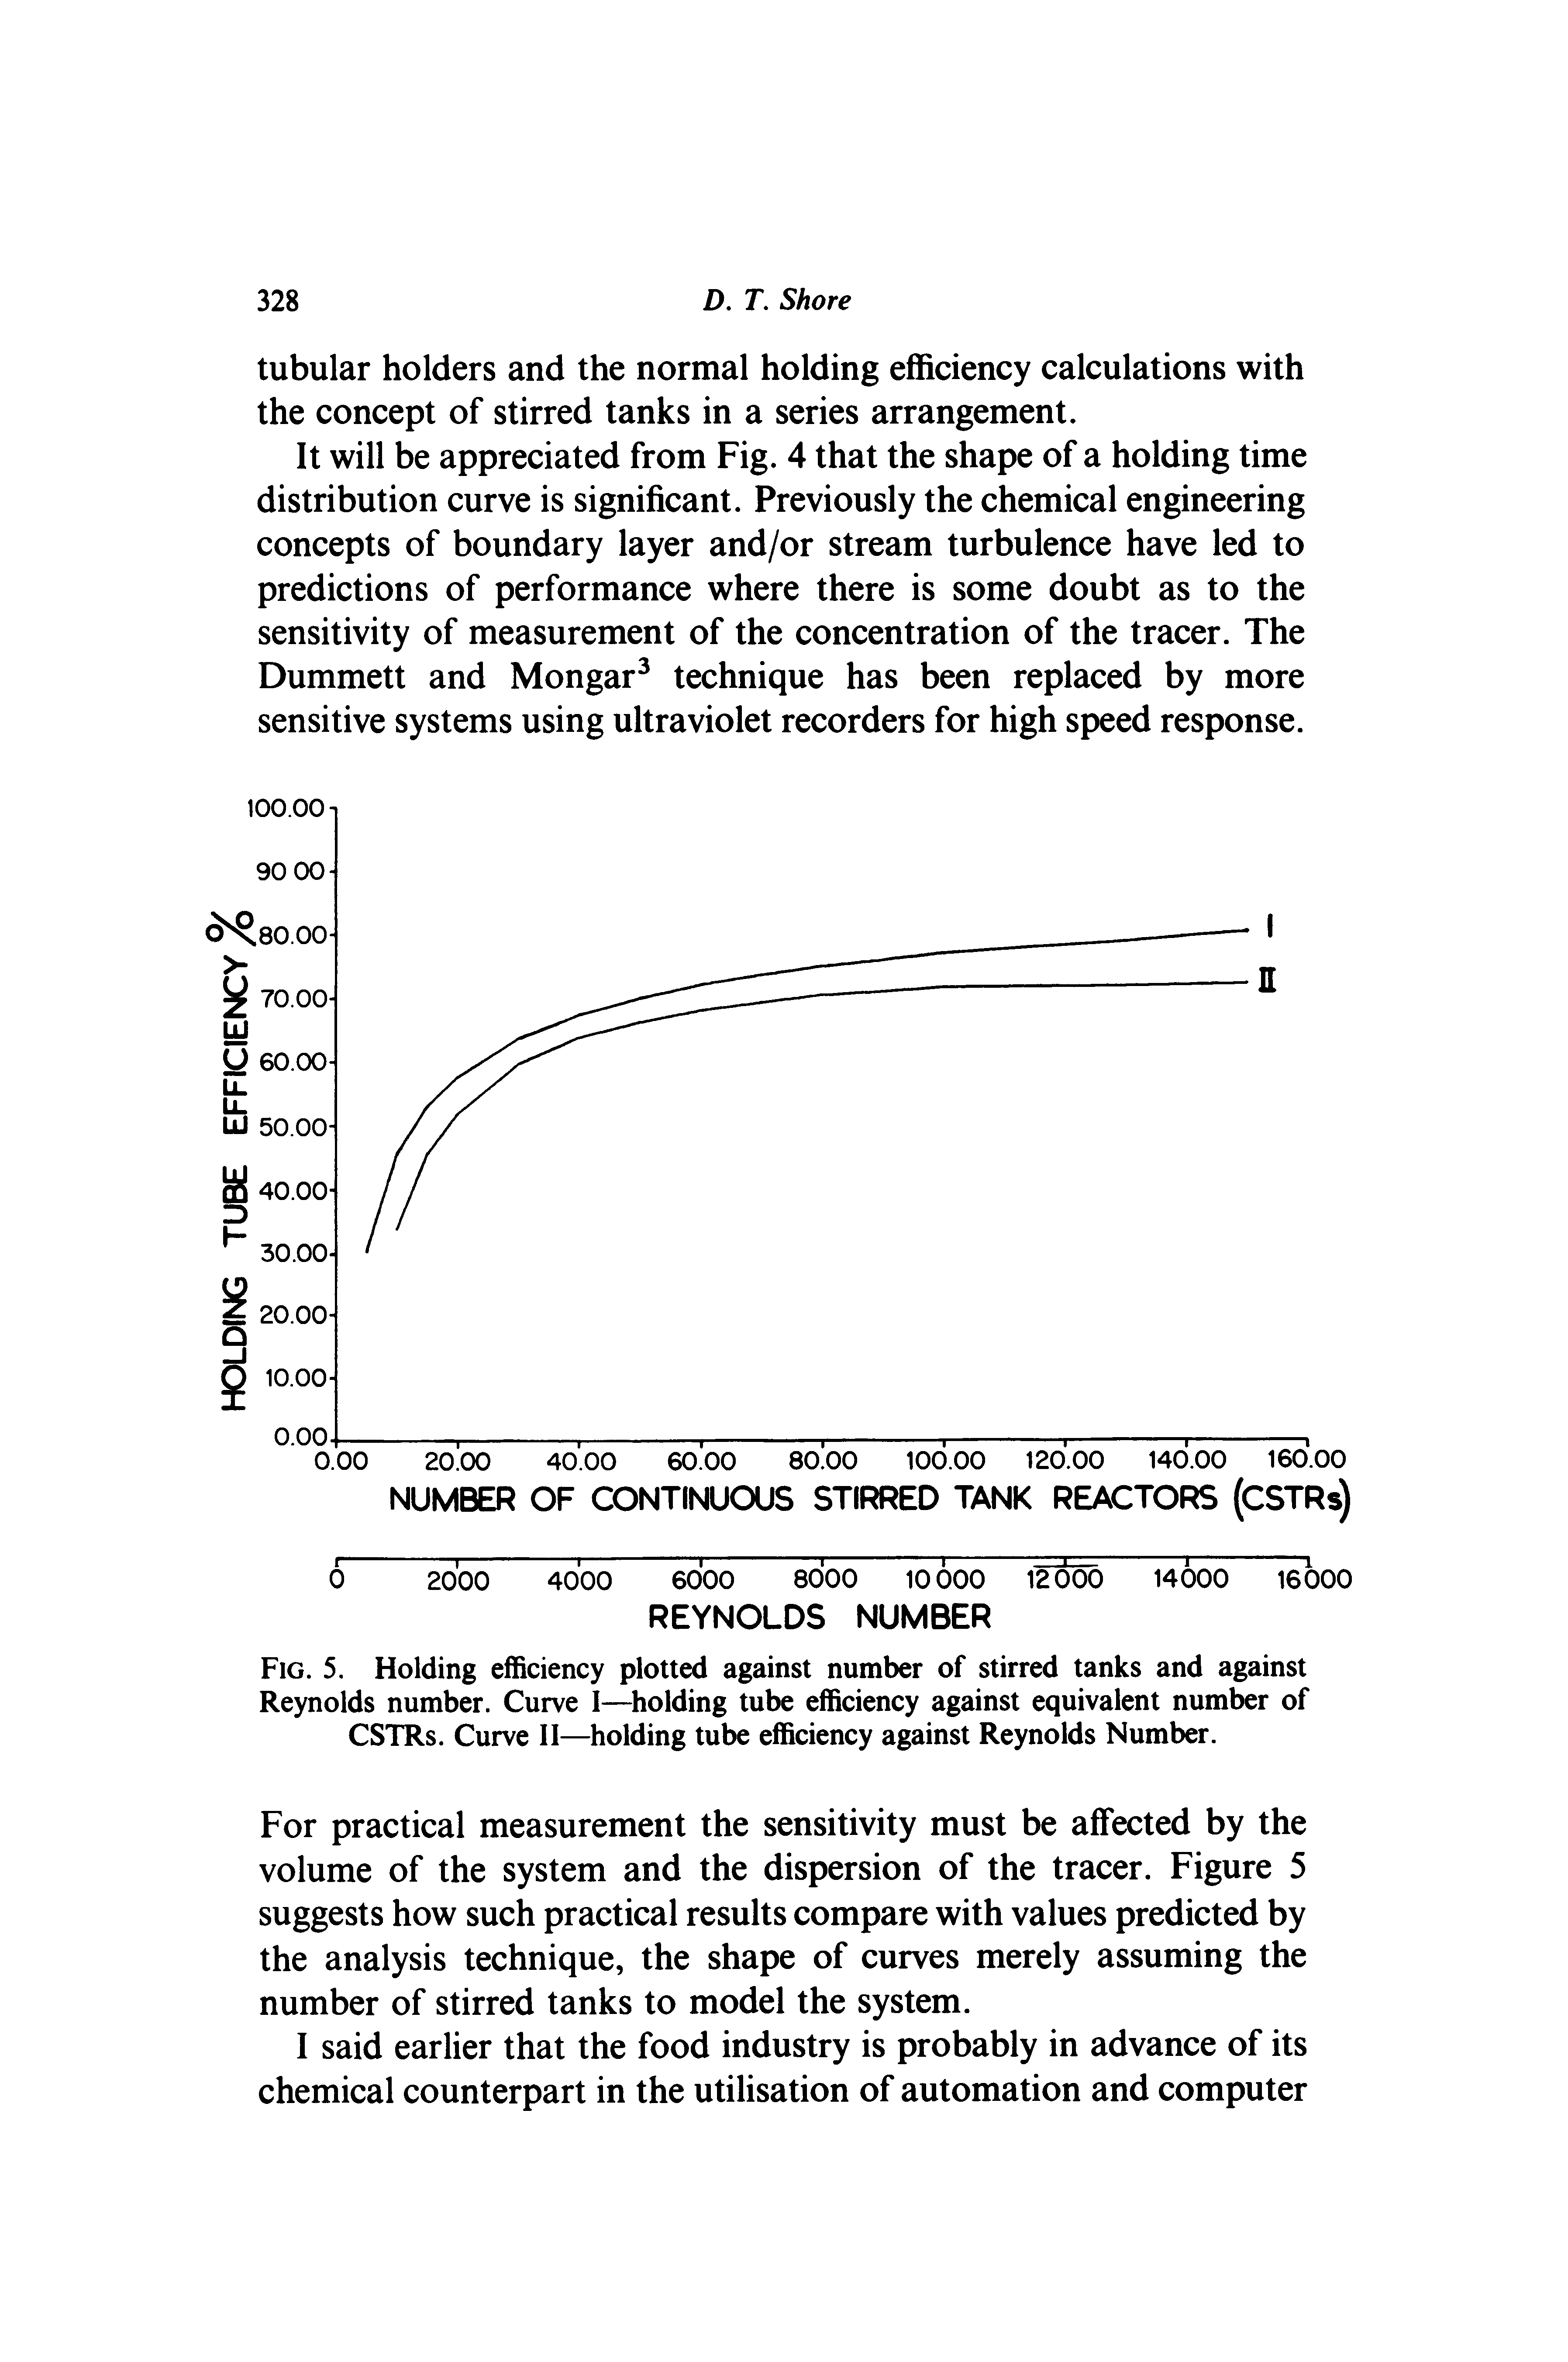 Fig. 5. Holding efficiency plotted against number of stirred tanks and against Reynolds number. Curve I— holding tube efficiency against equivalent number of CSTRs. Curve II—holding tube efficiency against Reynolds Number.